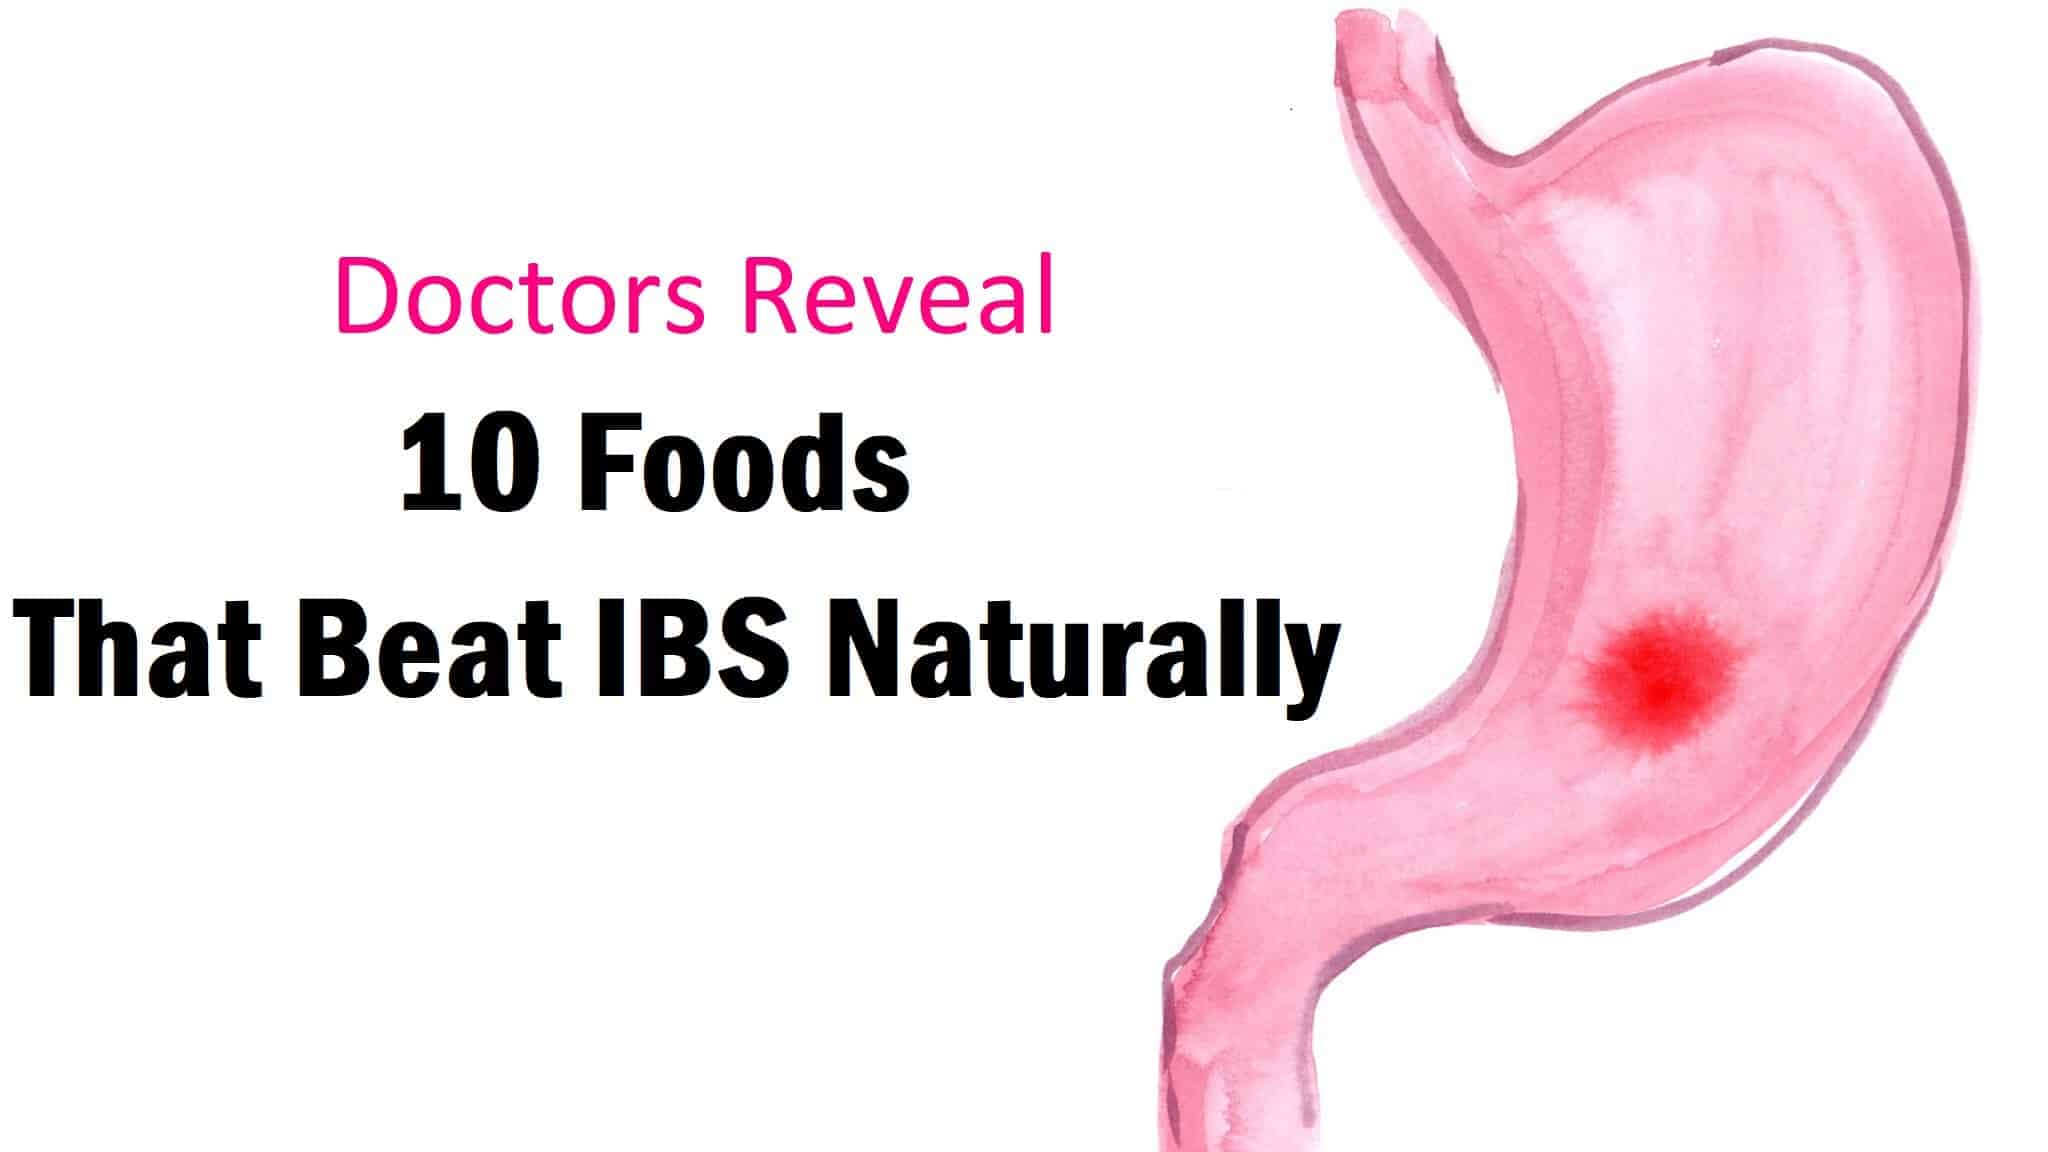 Doctors Reveal 10 Foods That Beat IBS Naturally